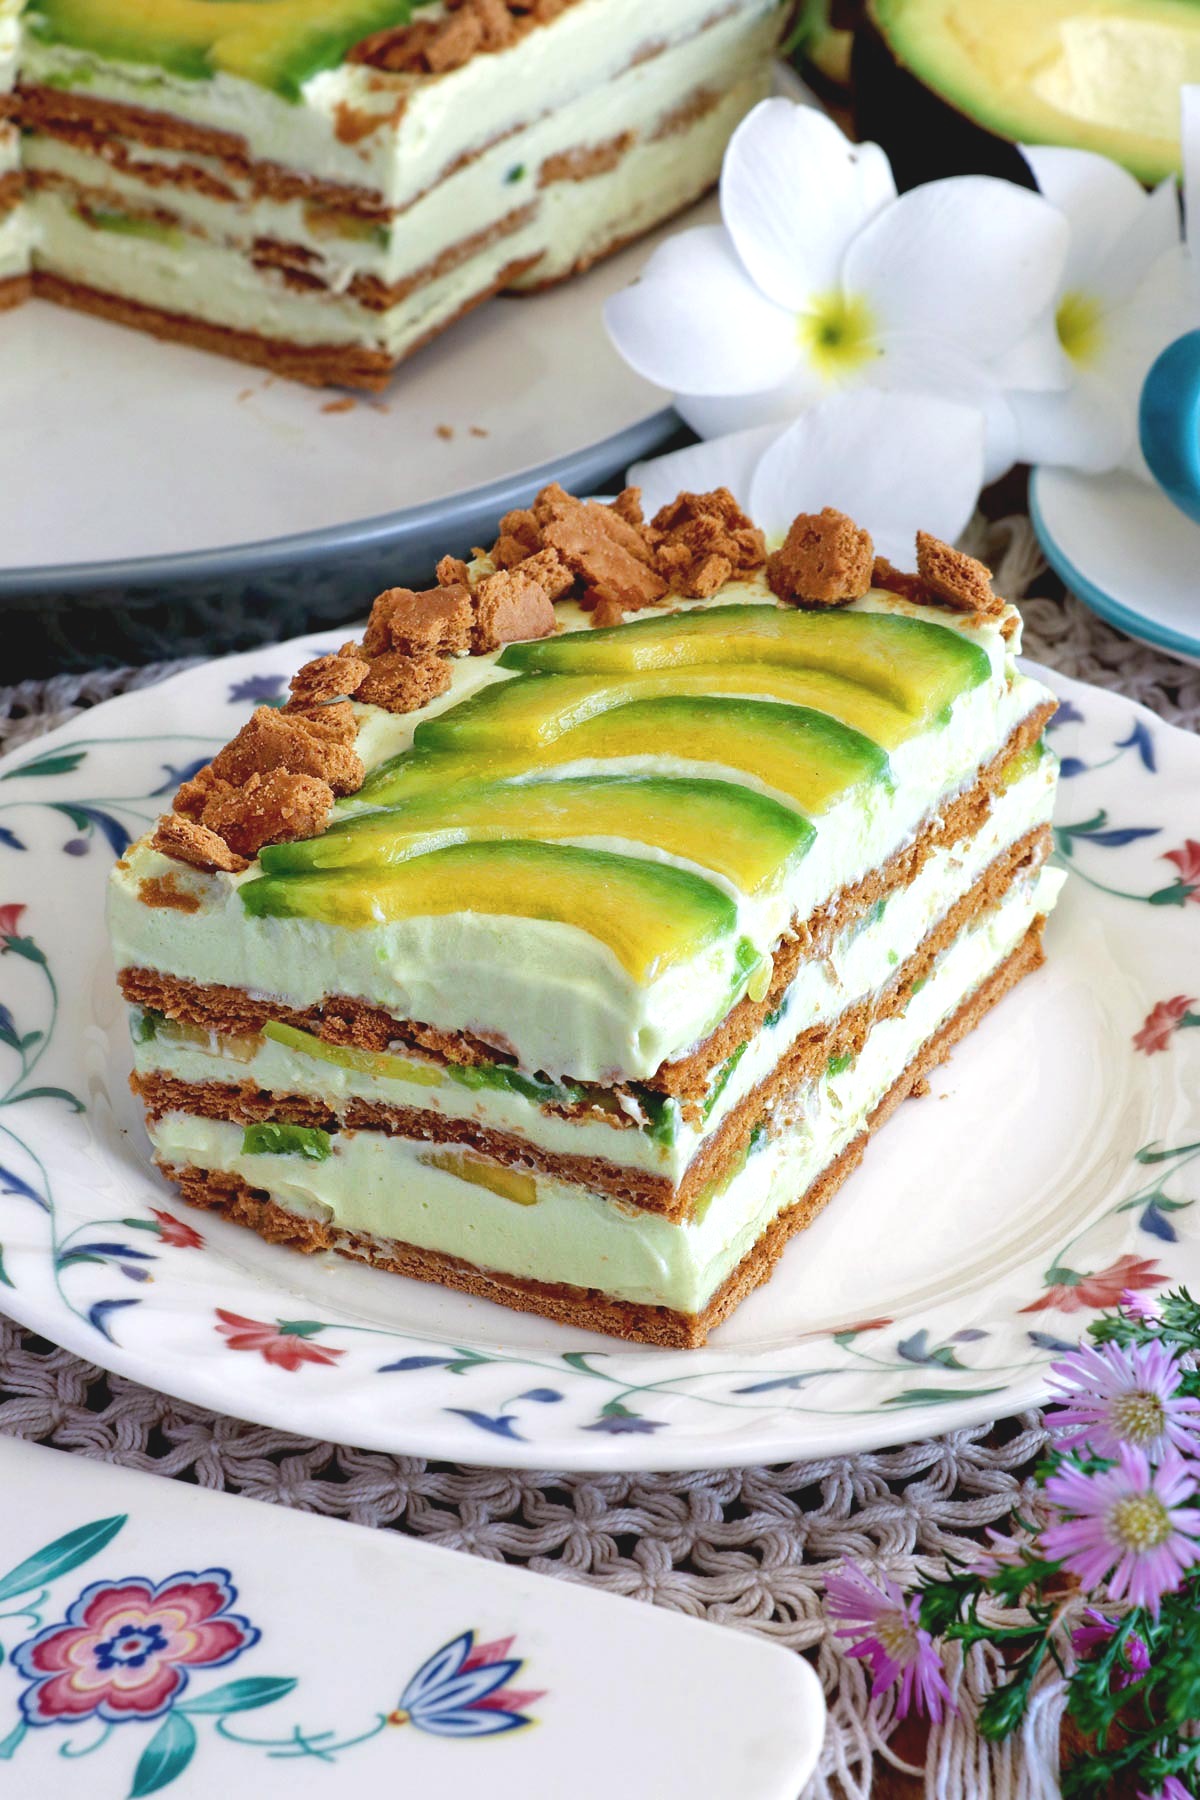 Slices of avocado float topped with slices of avocado and crushed graham crackers in serving plates.